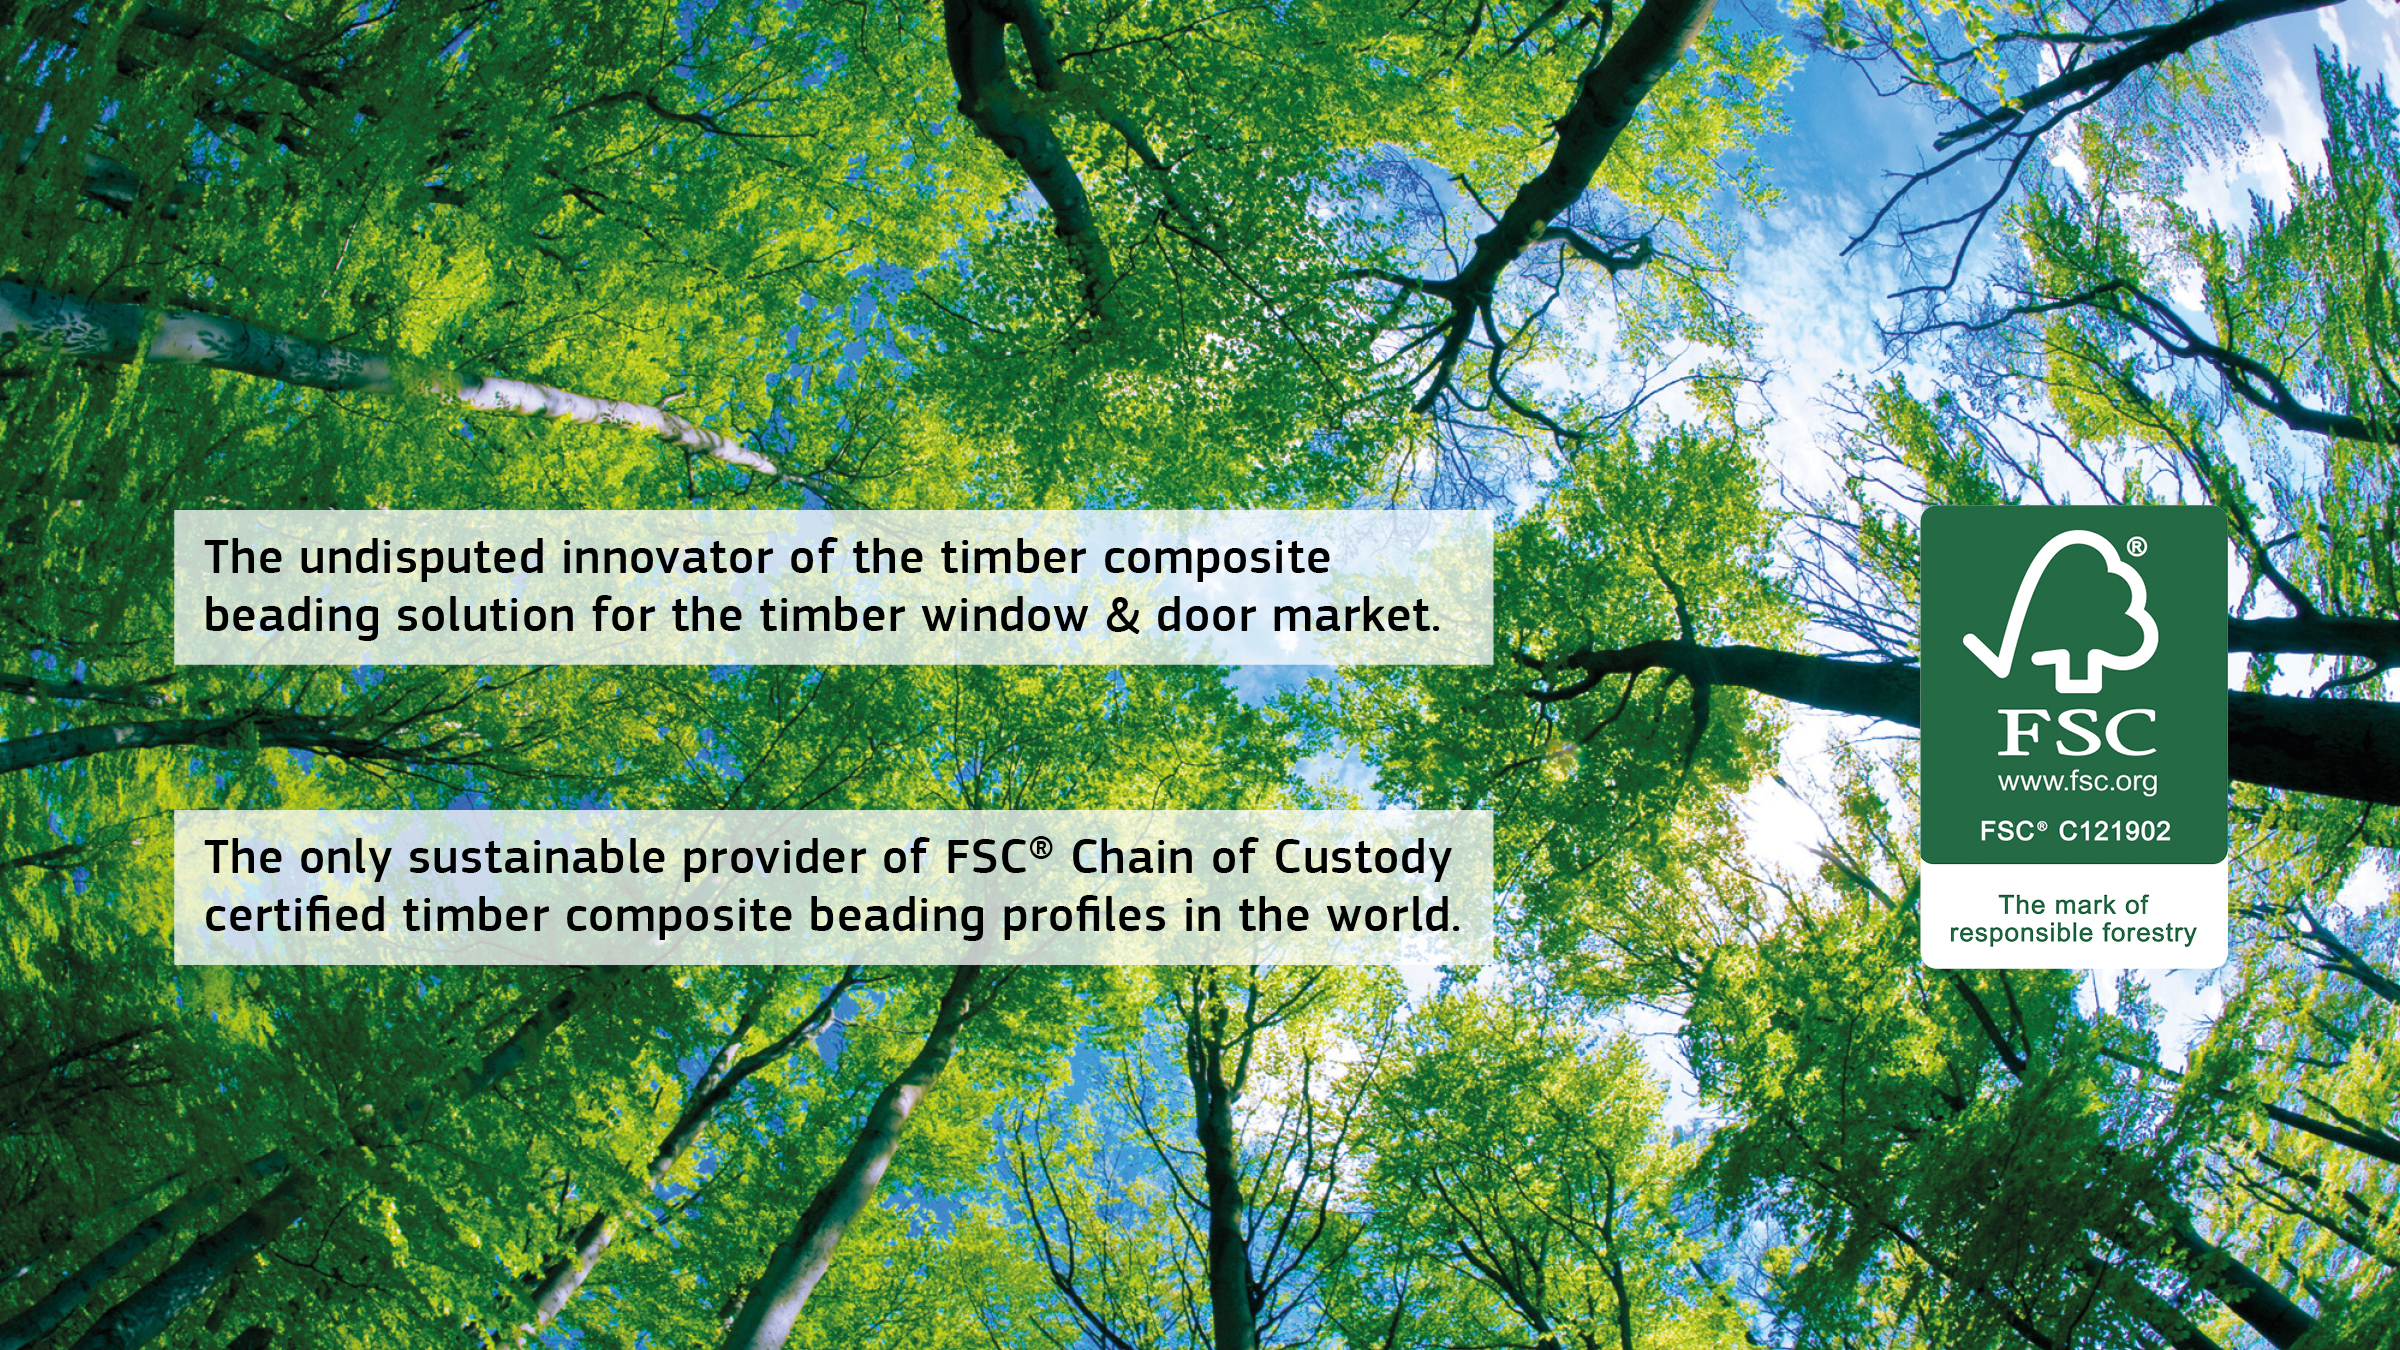 What does Chain of Custody mean?